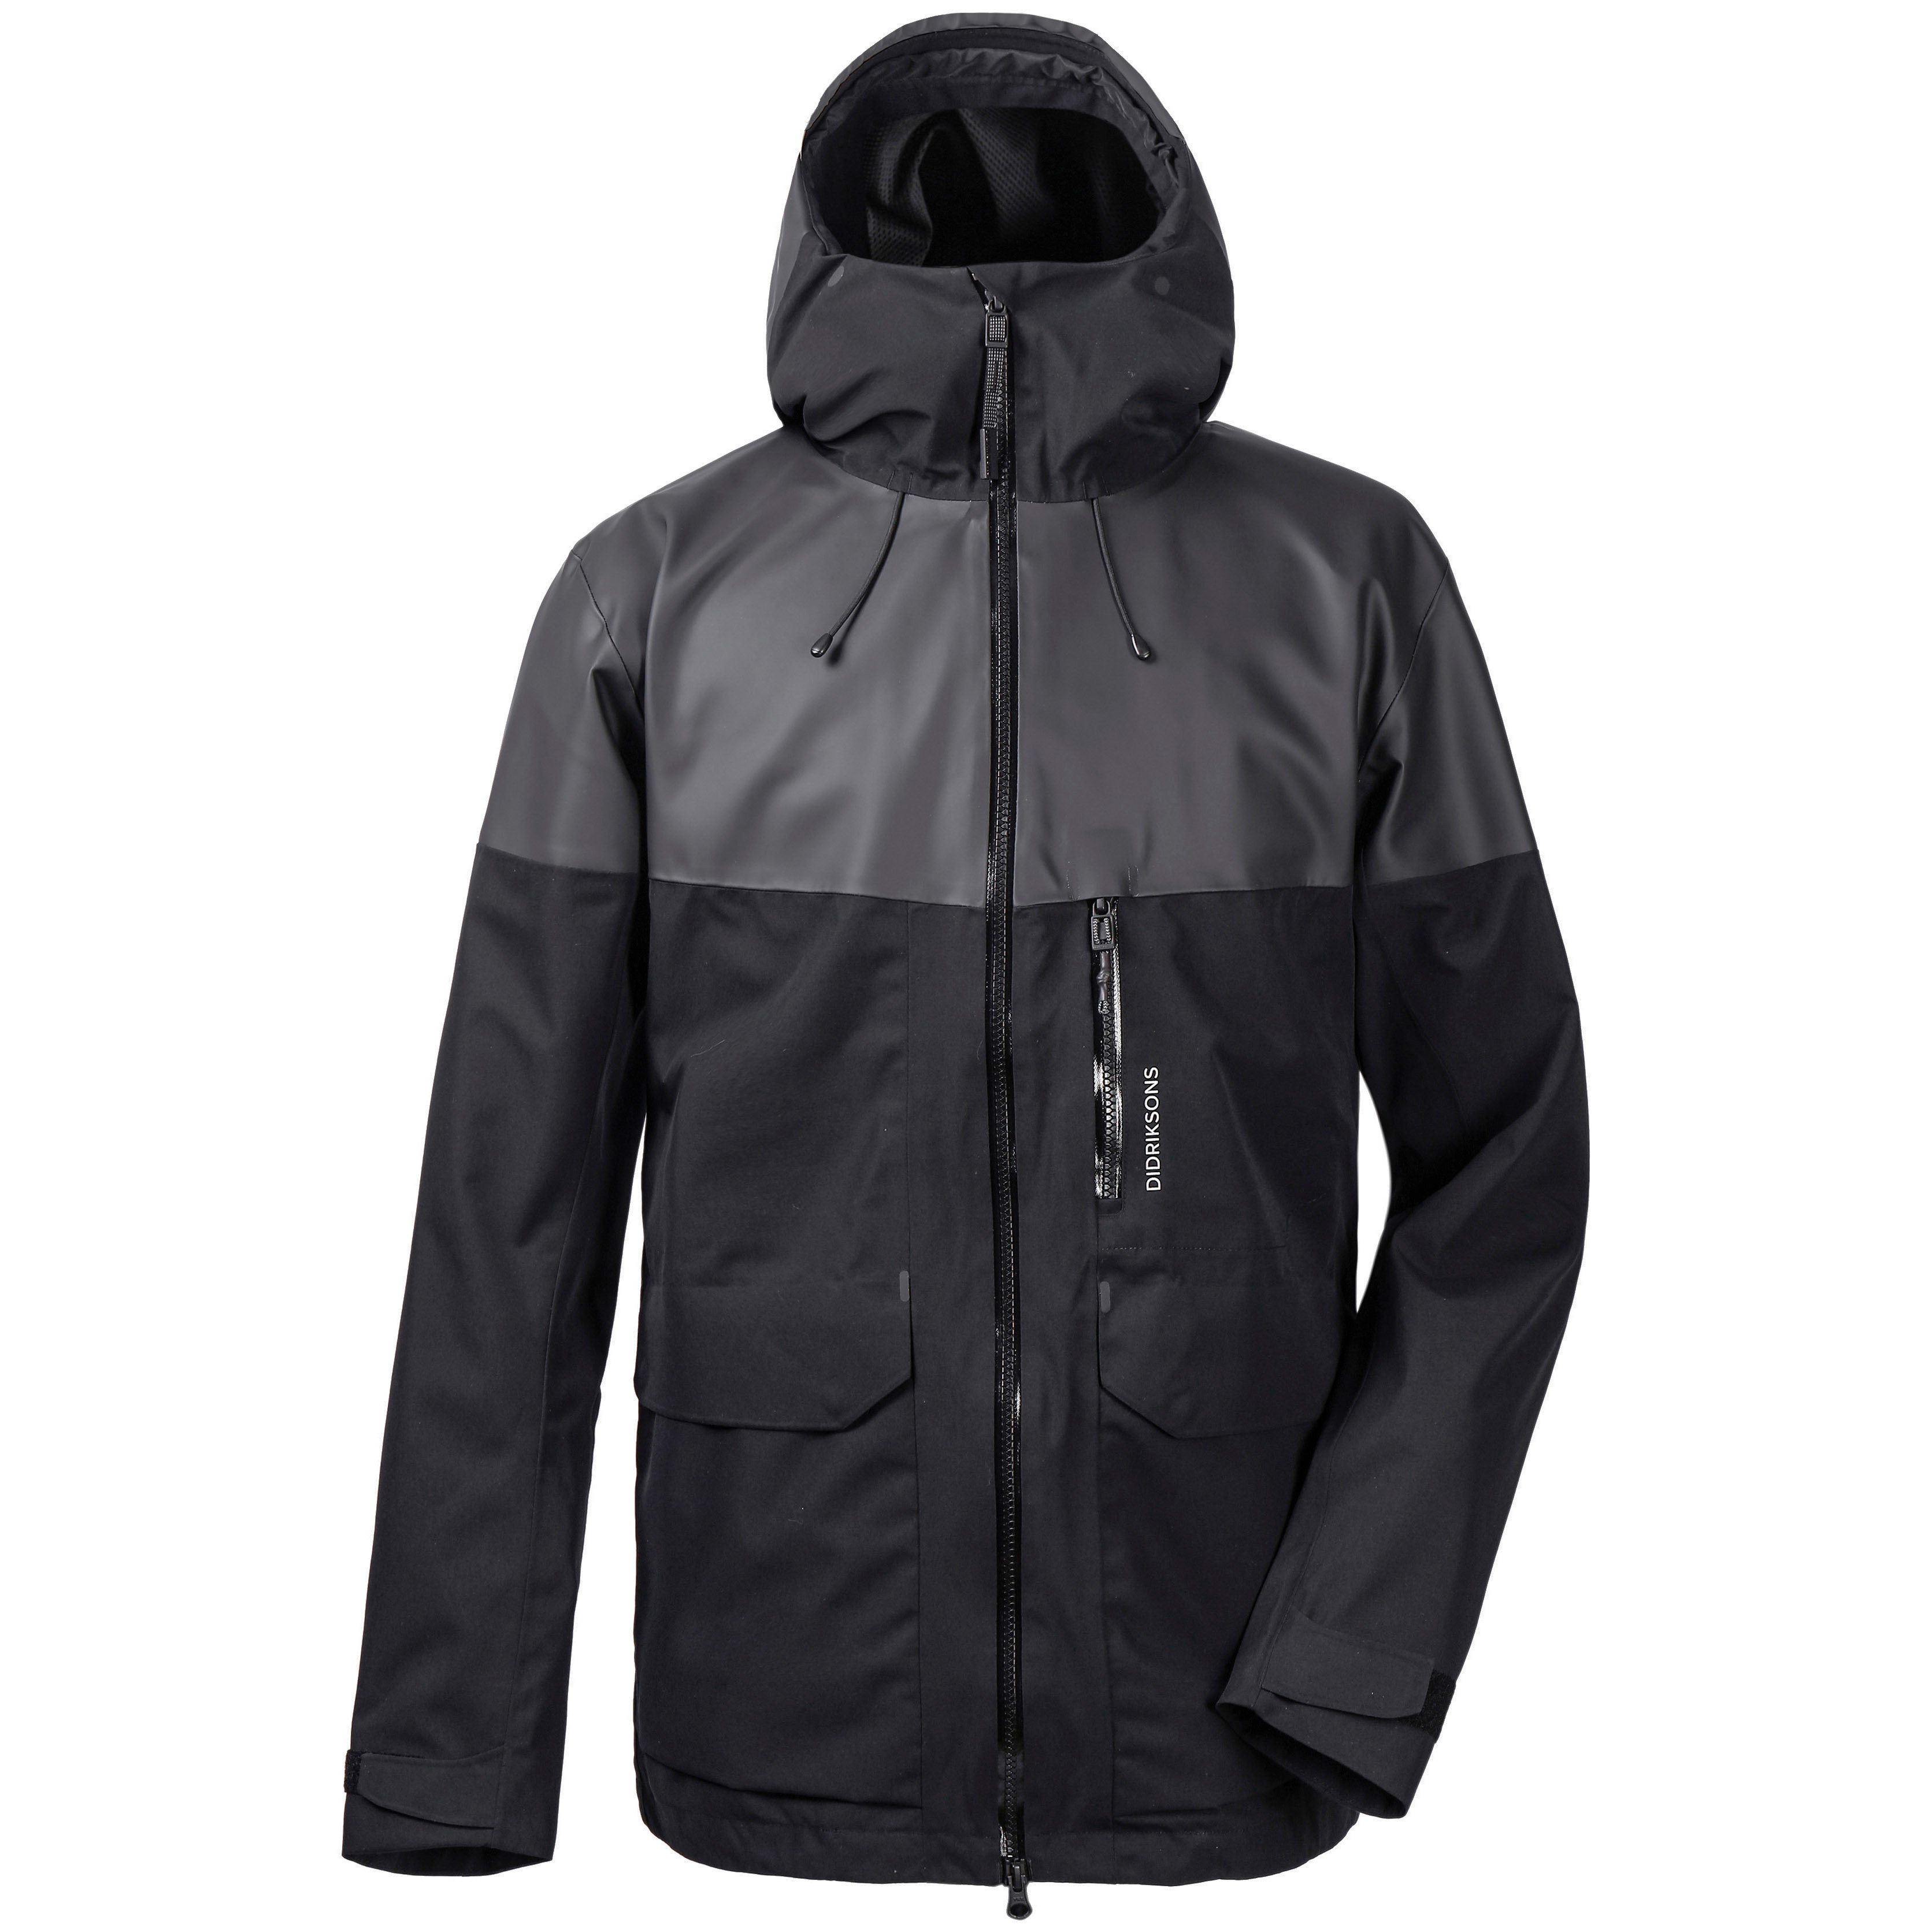 Buy Didriksons Lucas Men's Jacket from Outnorth